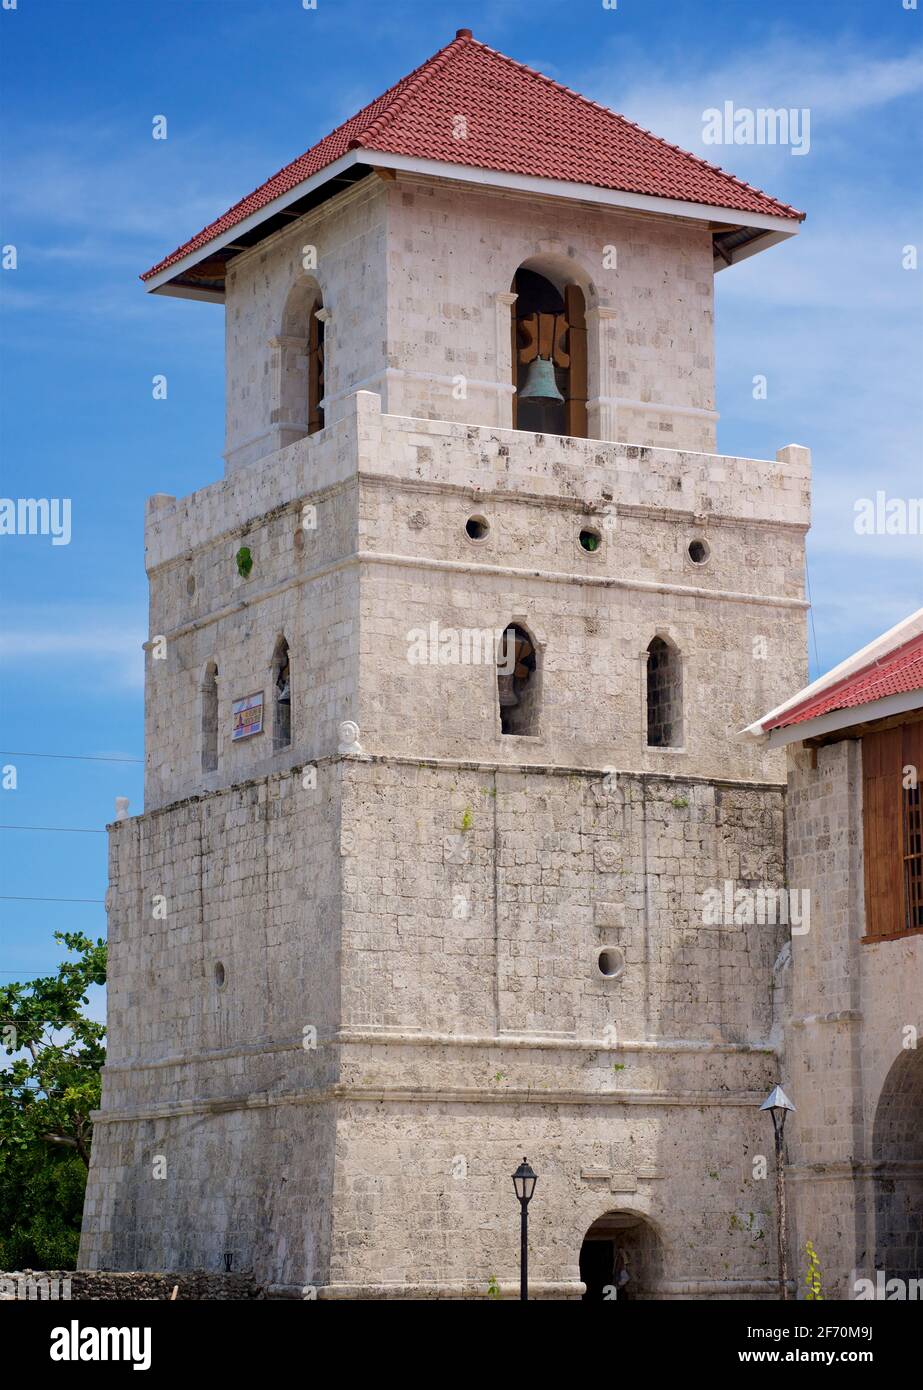 Baclayon Church, Baclayon, Bohol island. Otherwise known as La Purisima Concepcion de la Virgen Maria Parish Church. Central Visayas, Philippines. Bell and watchtower of coral stone; completed 1737. Stock Photo